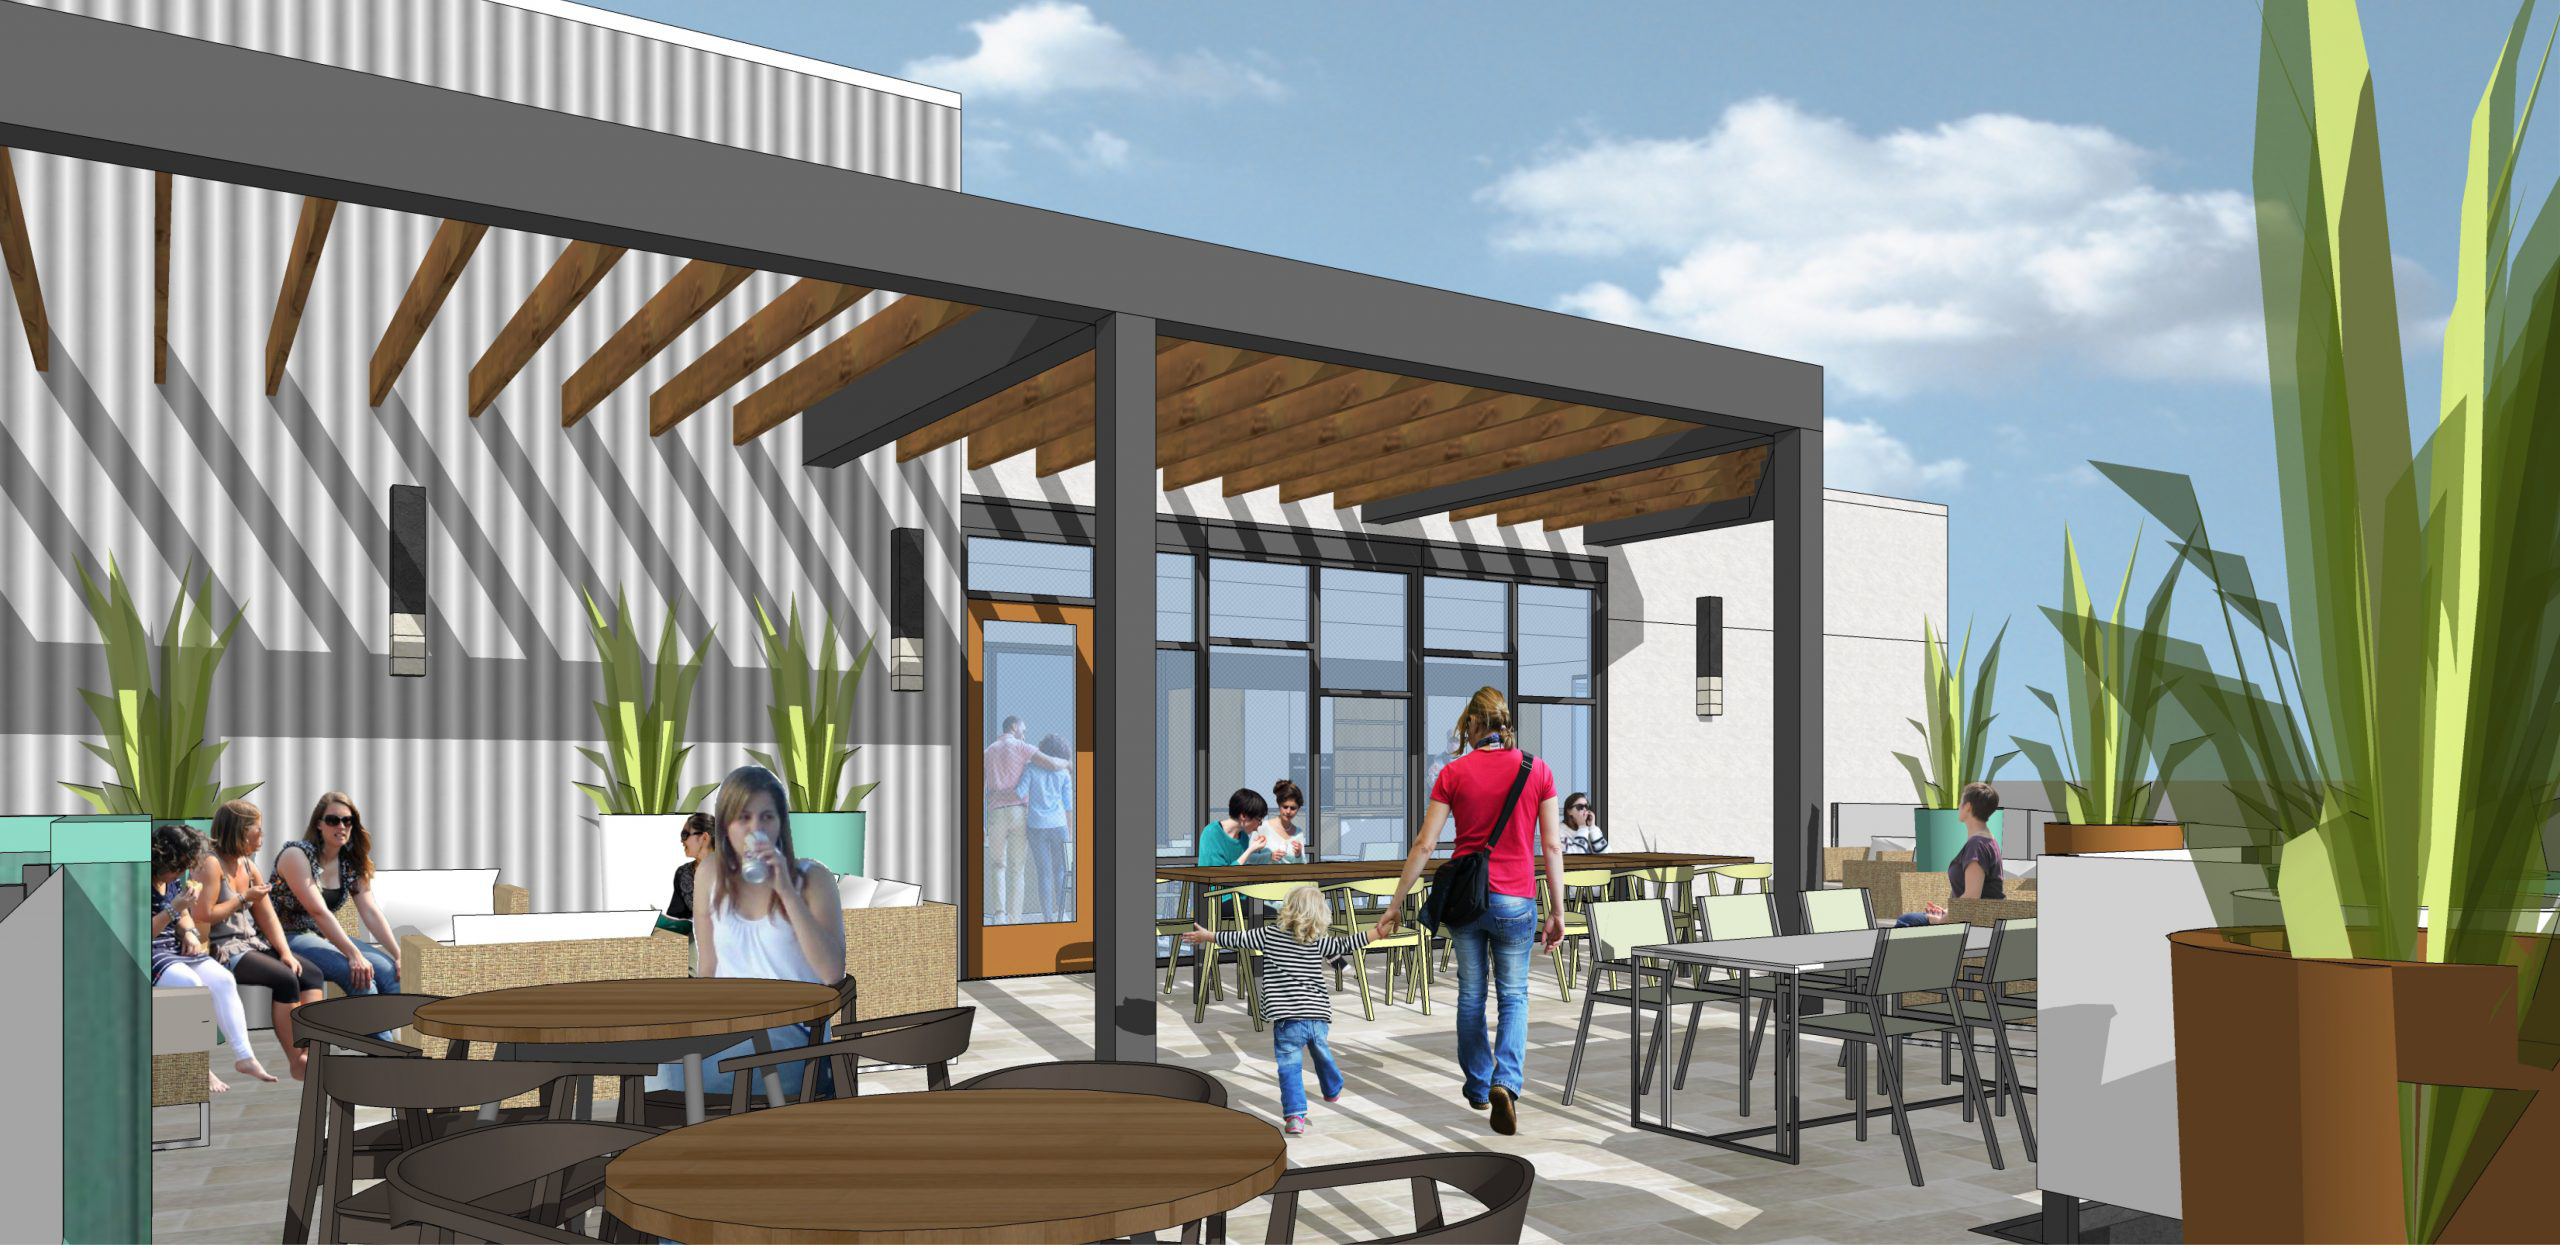 750 West San Carlos rooftop terrace, rendering via SGPA Architecture and Planning